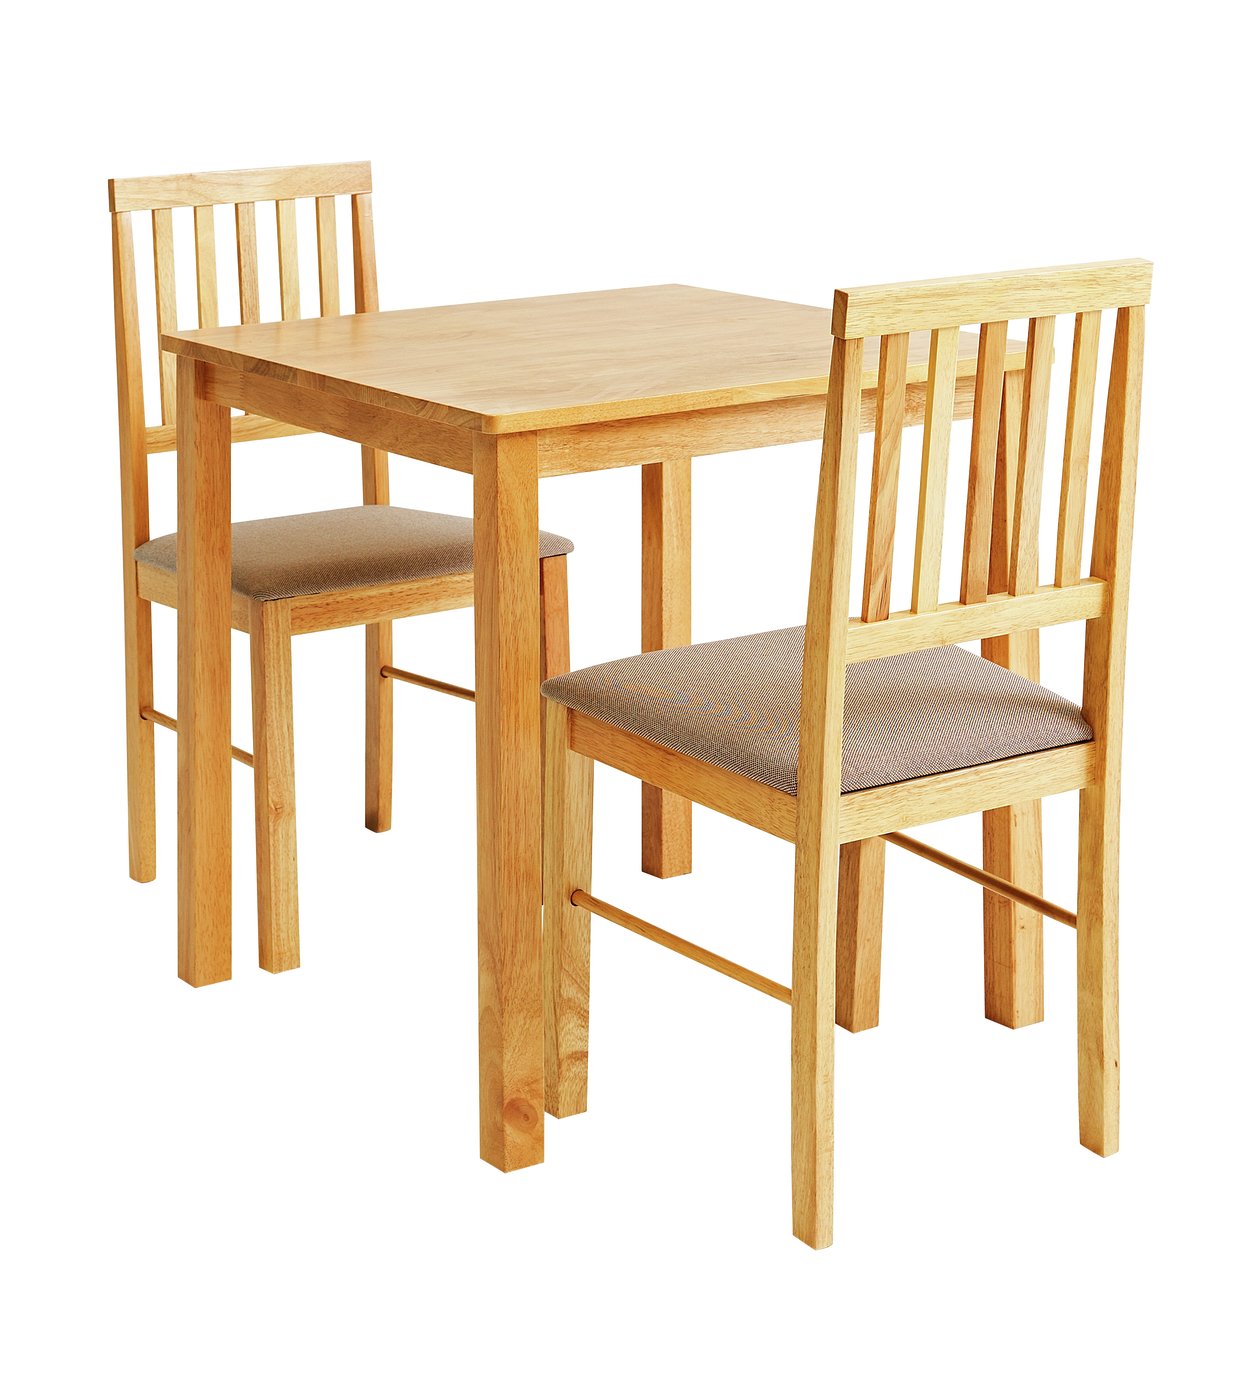 Argos Home Kendal Solid Wood Dining Table & 2 Natural Chairs